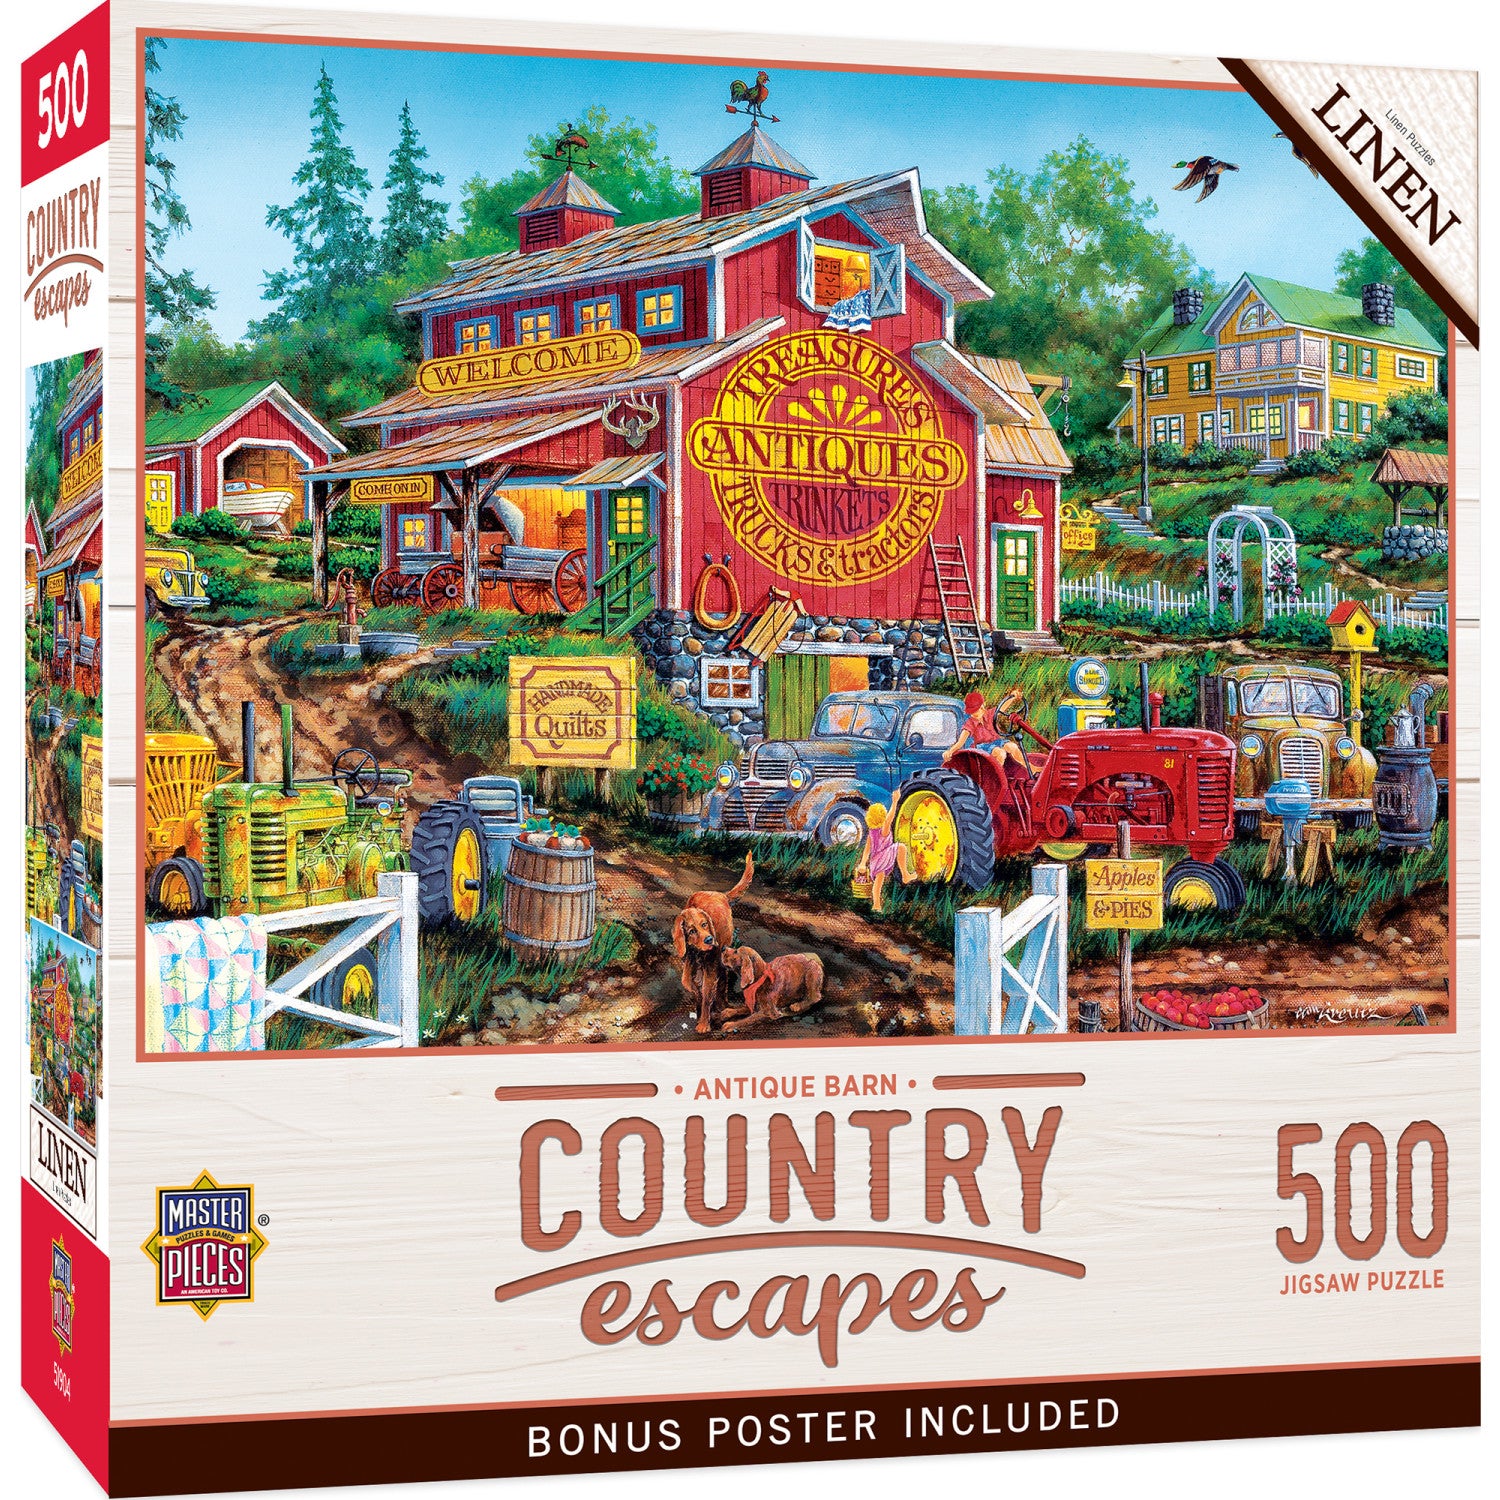 Country Escapes - Antique Barn 500 Piece Jigsaw Puzzle